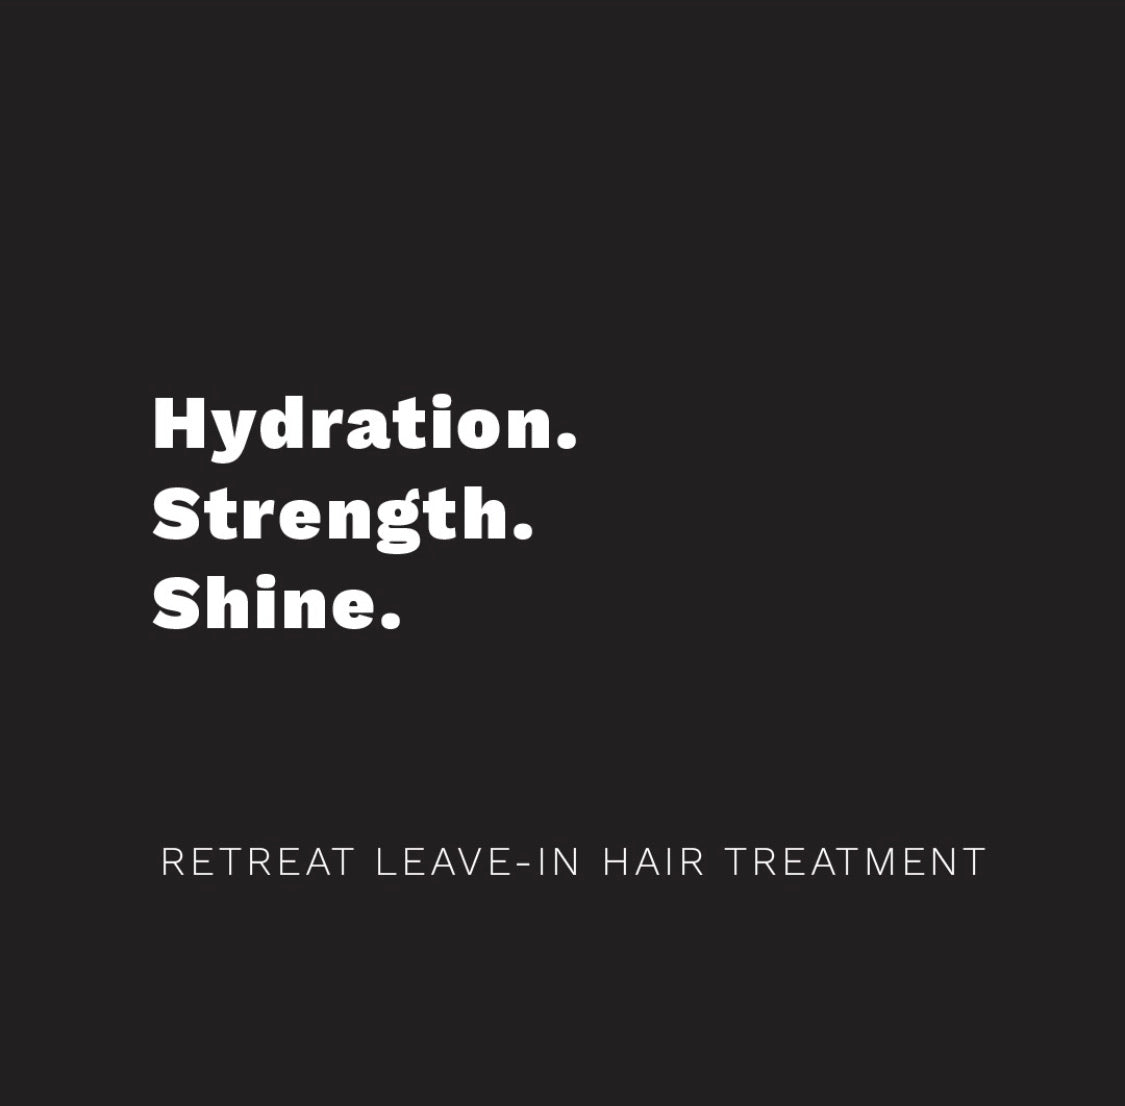 Retreat - Leave in hair treatment